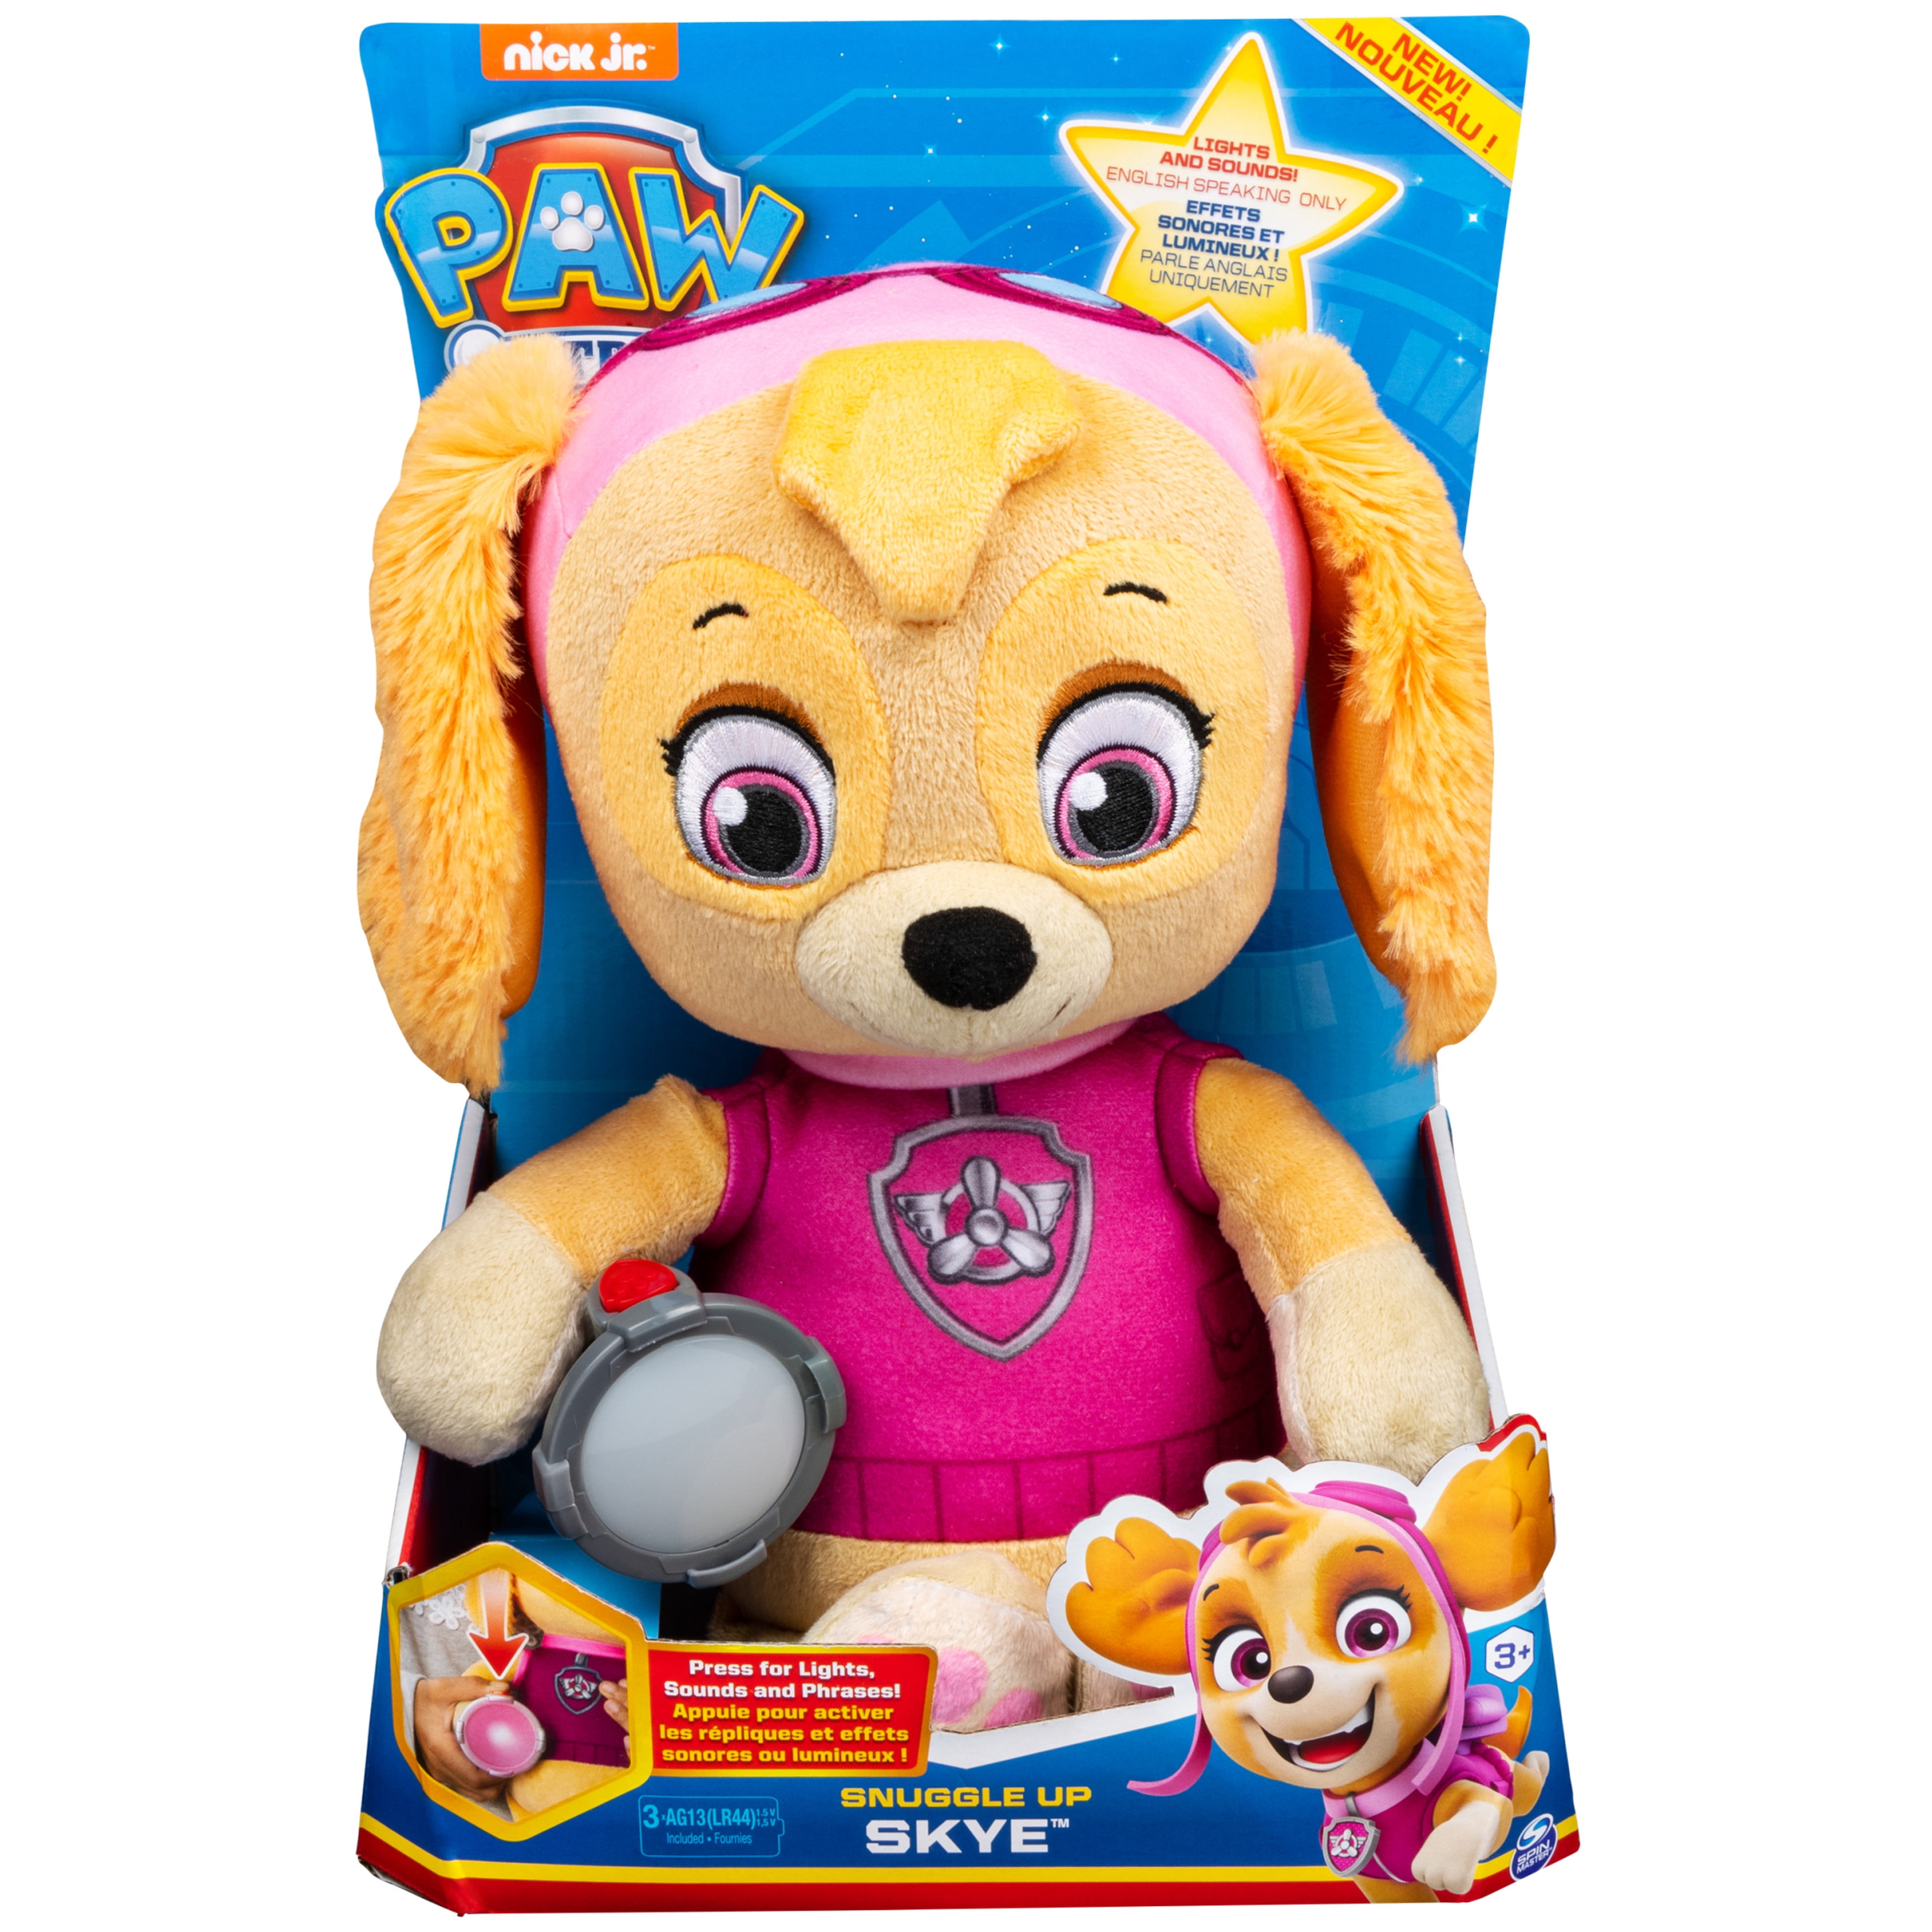 PAW Patrol, Snuggle Up and Skye Sounds, Up with for 3 Kids Plush Flashlight Aged and